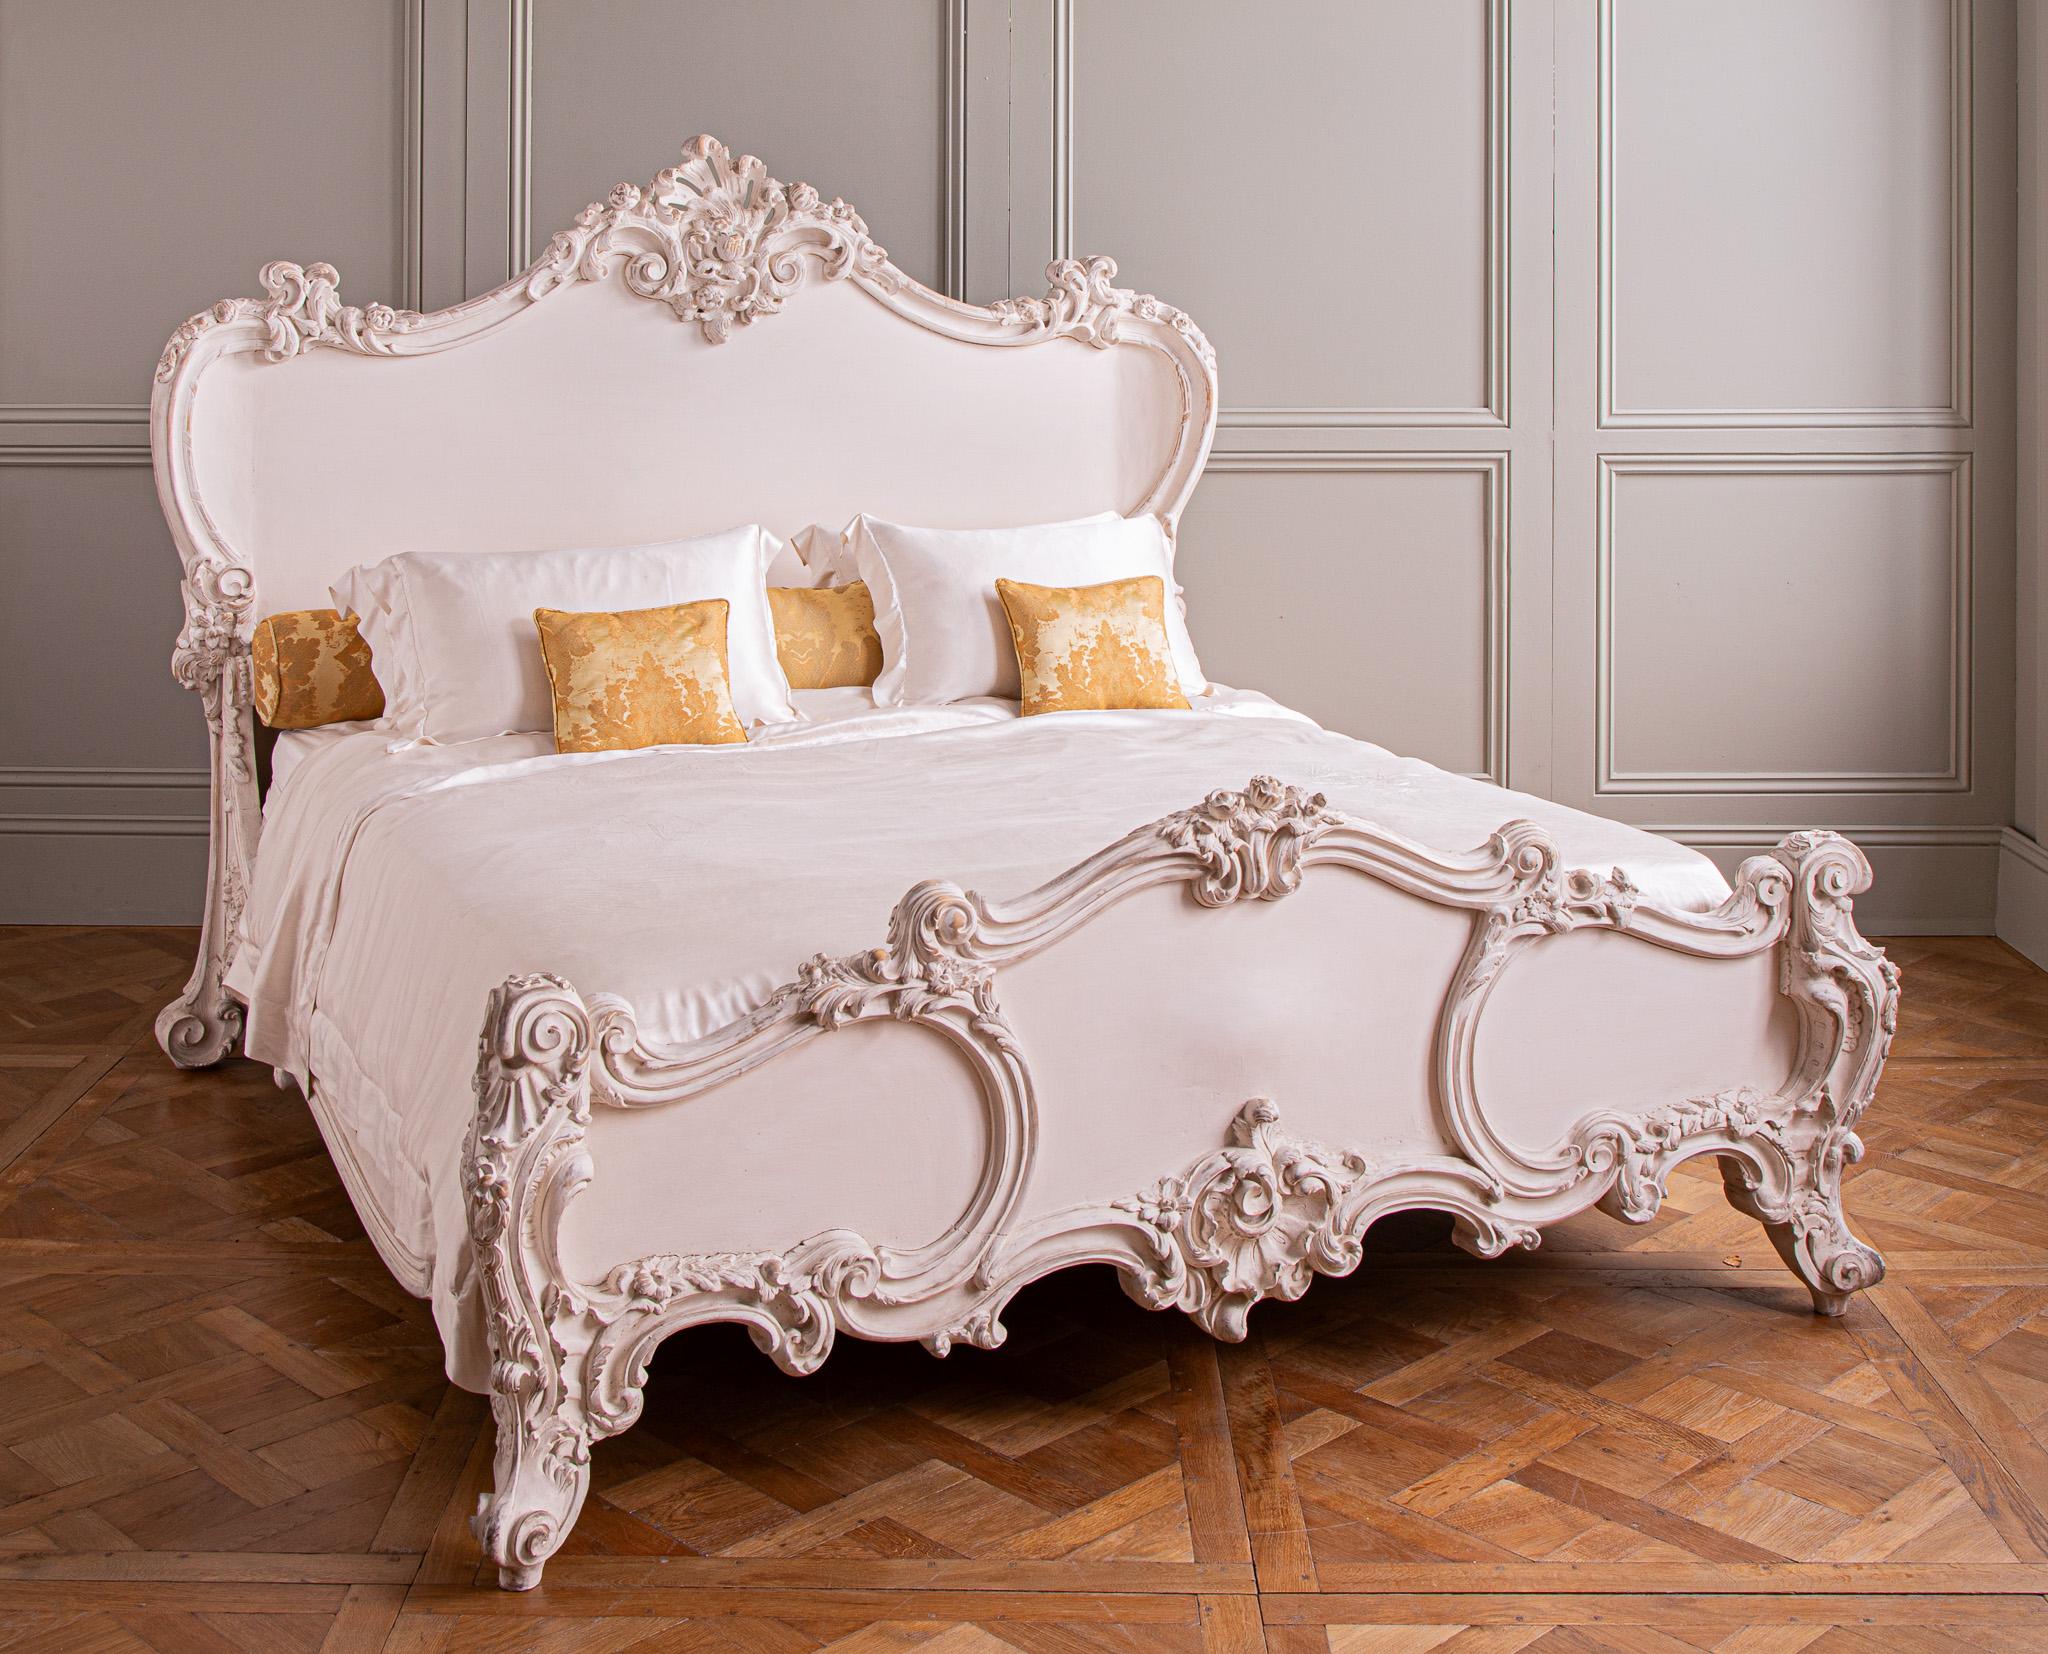 Rococo The Cherub Bed Painted In White Gesso By La Maison London  US King For Sale